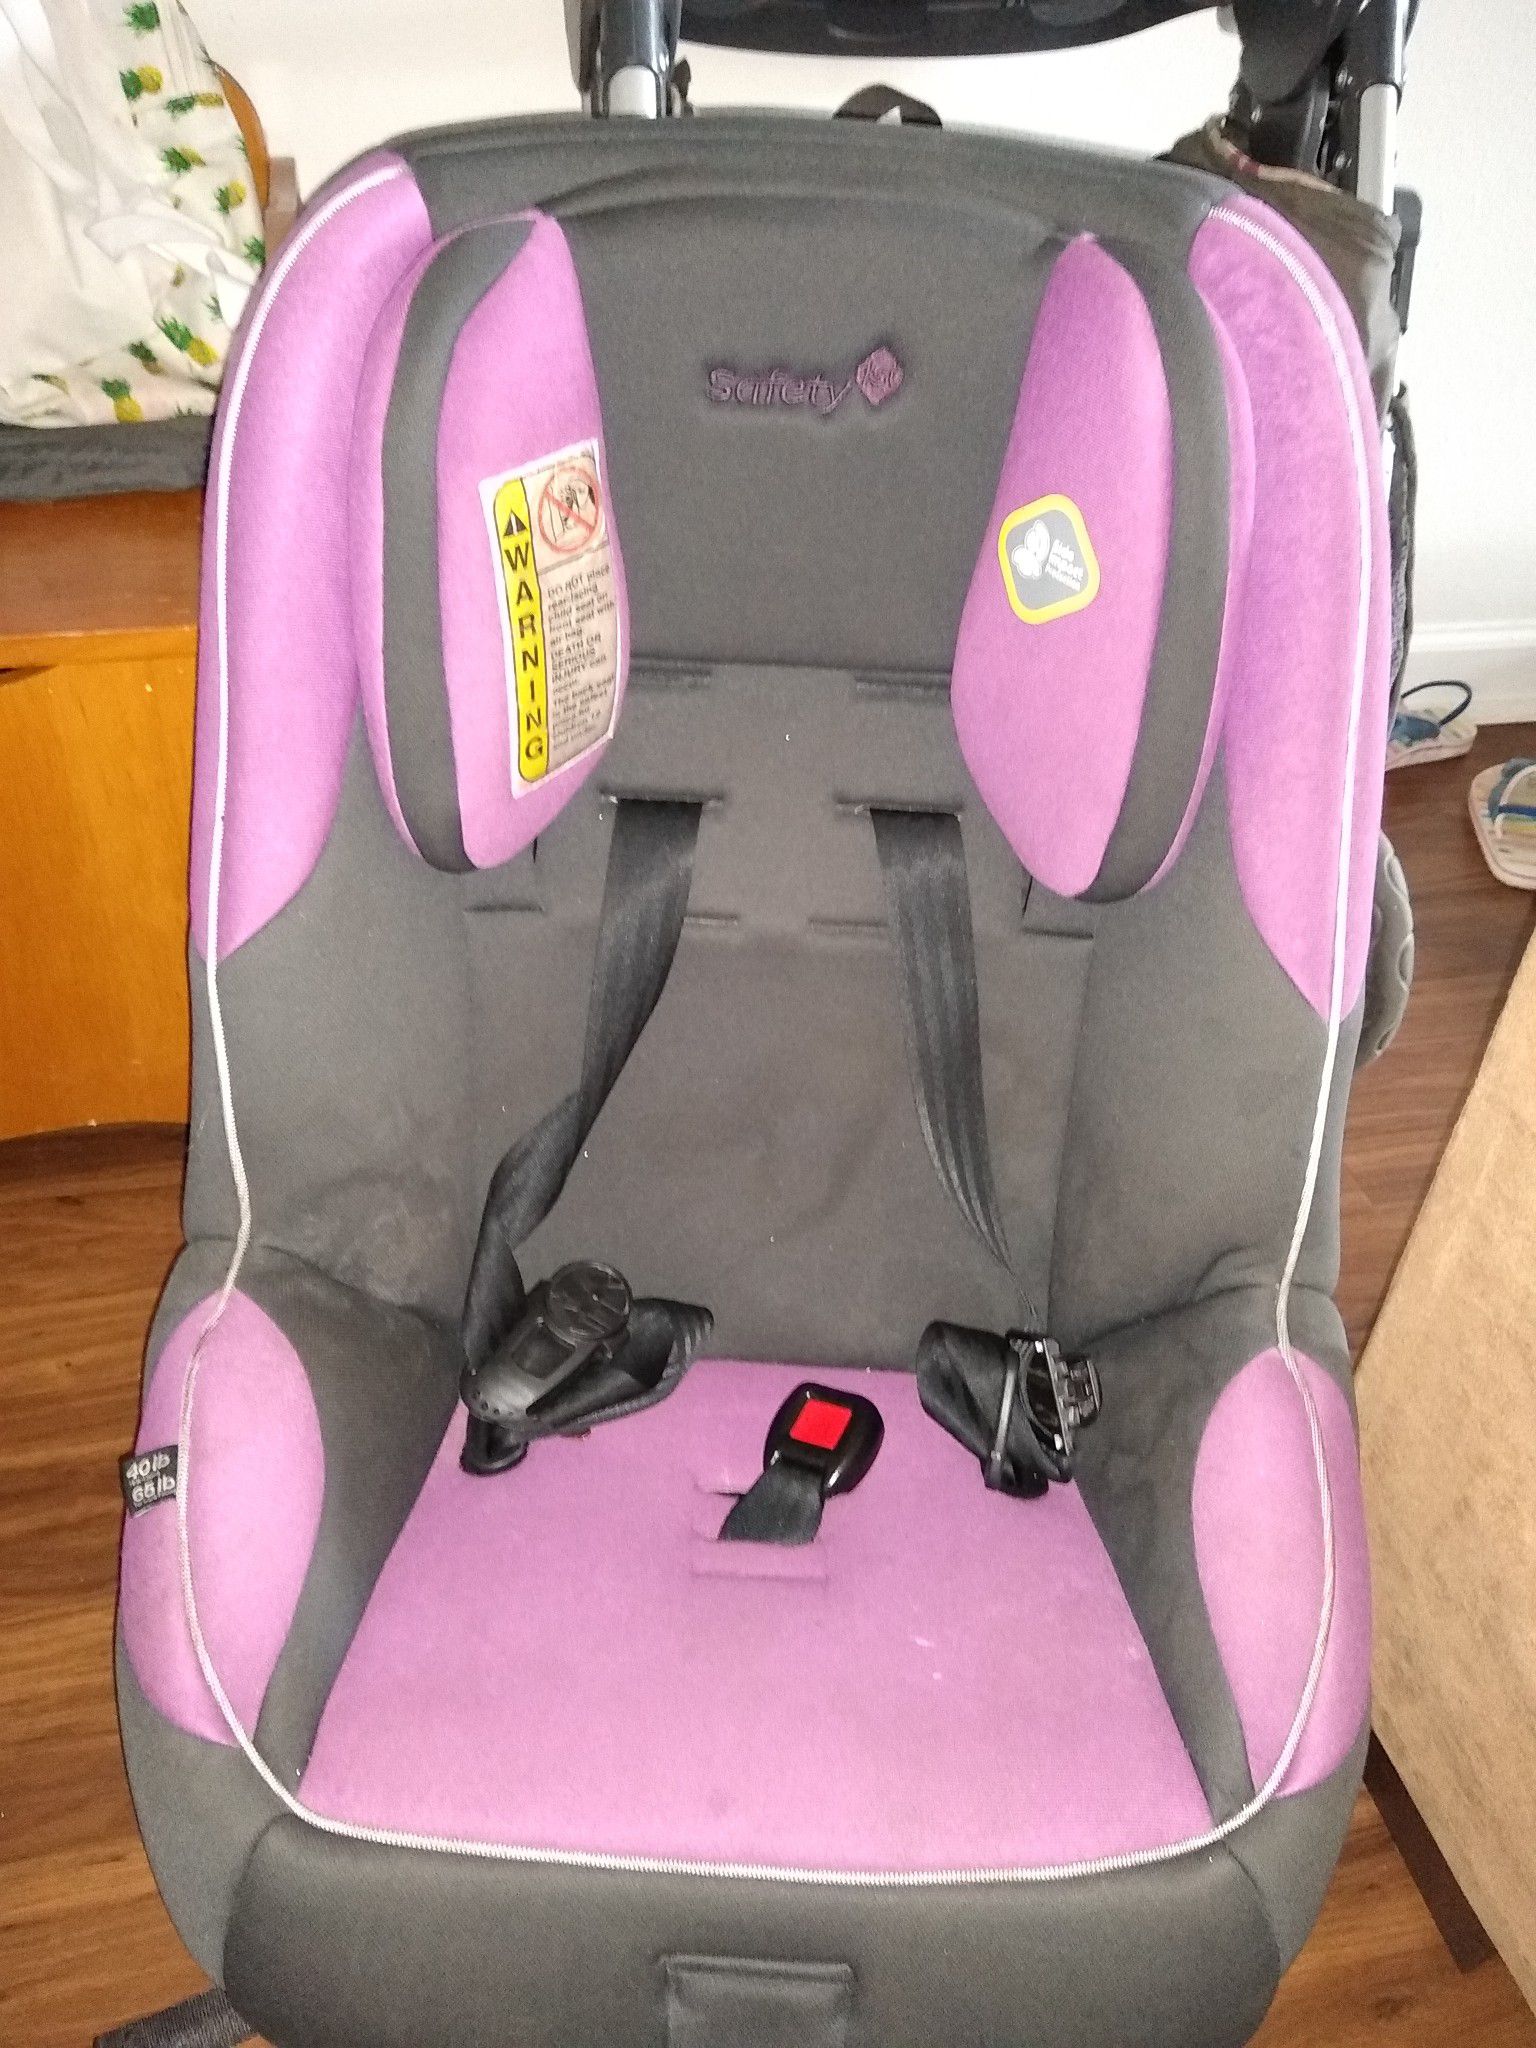 Safety one car seat